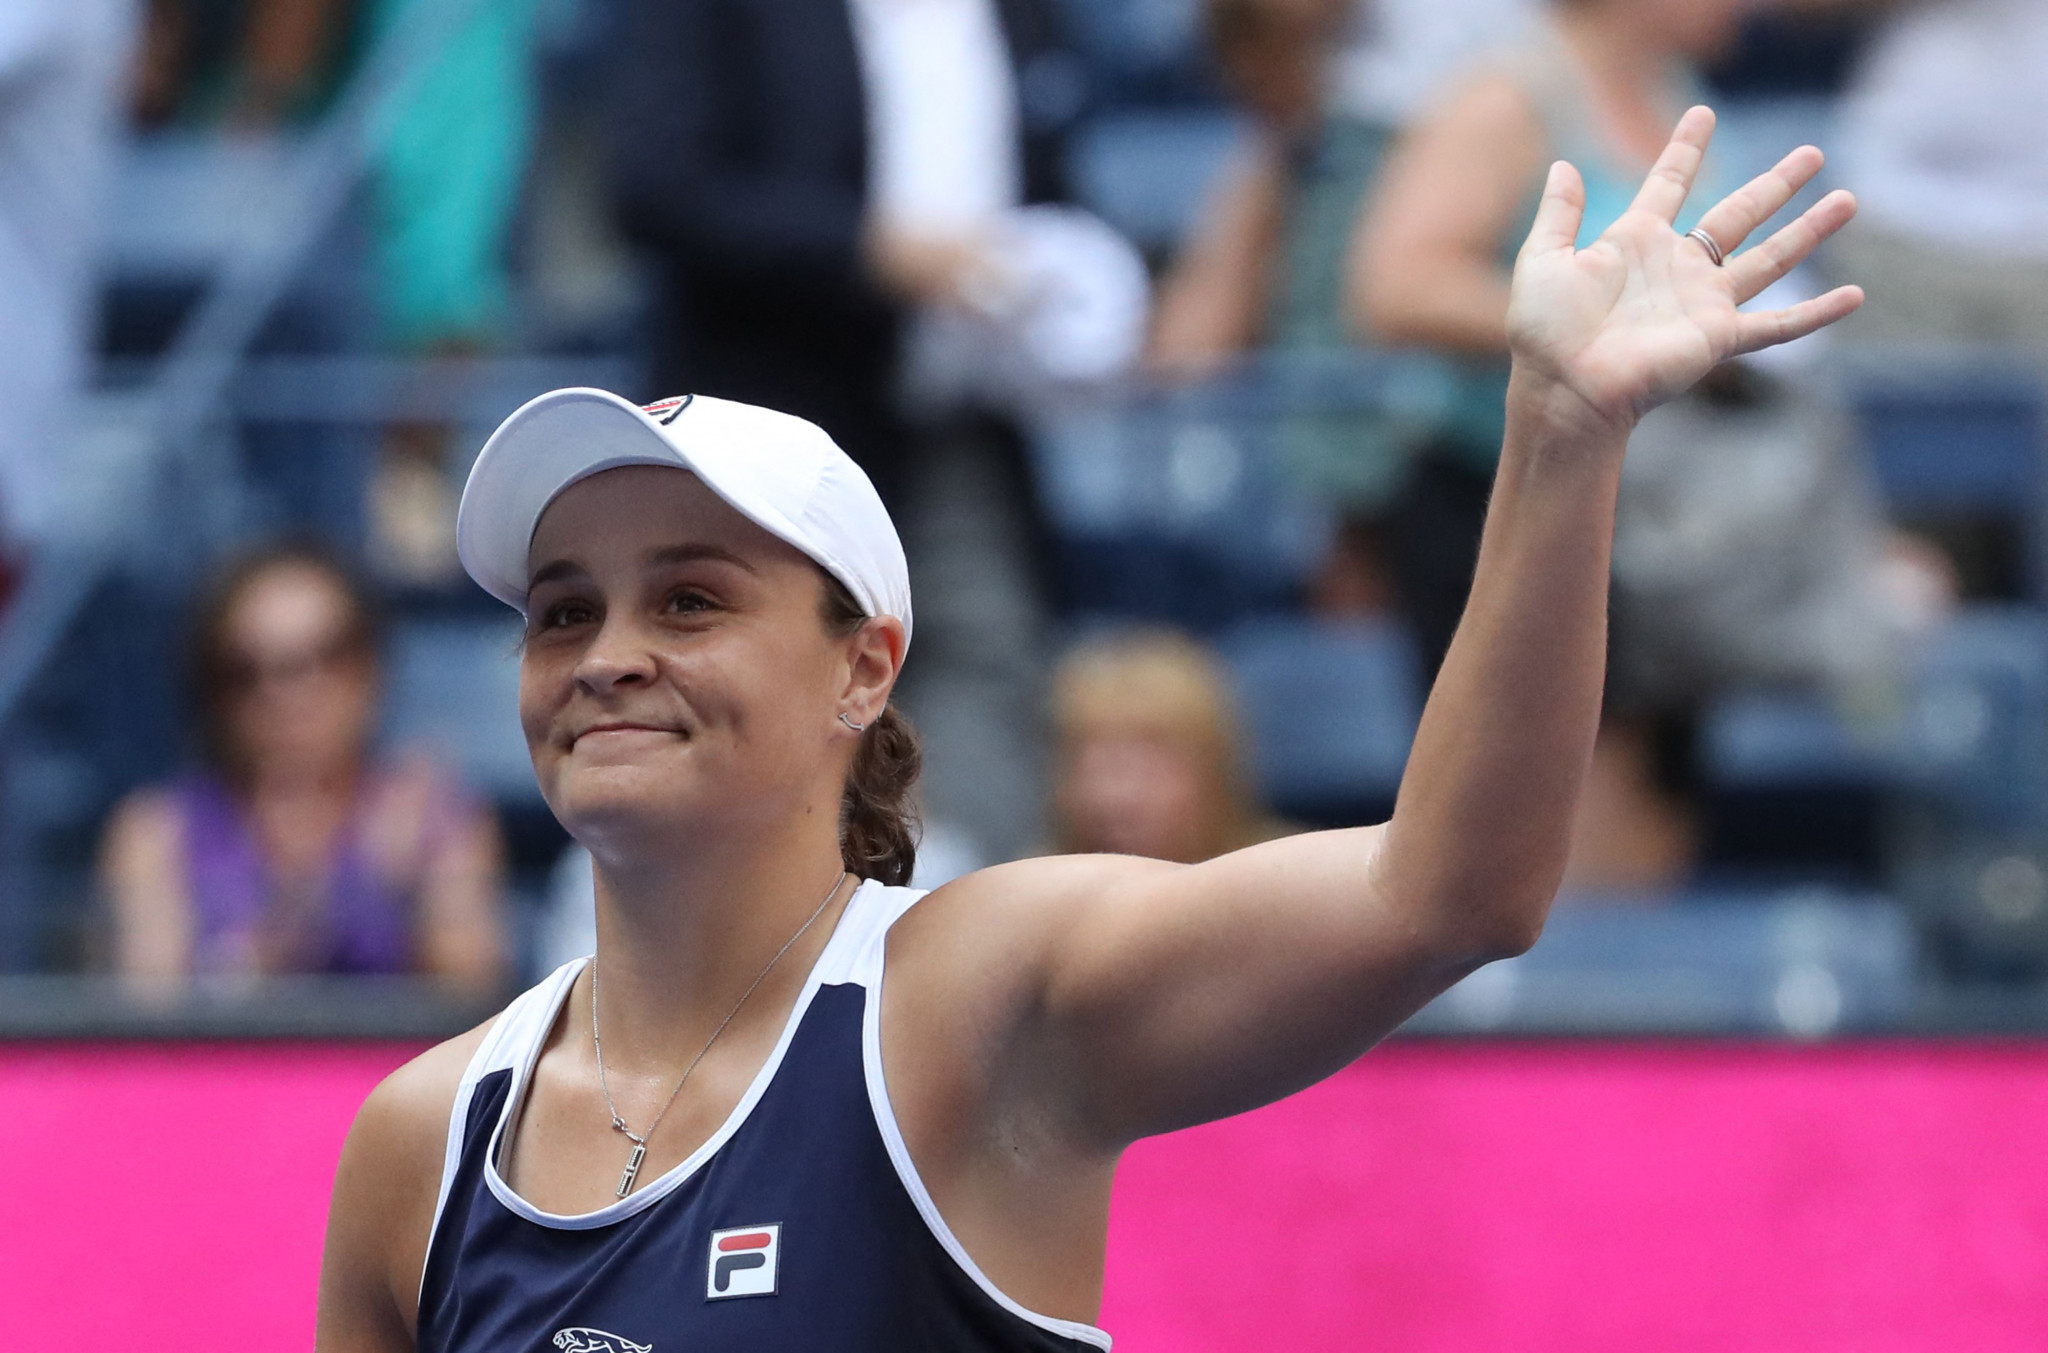 Top seed Barty among women's singles winners on day two of US Open